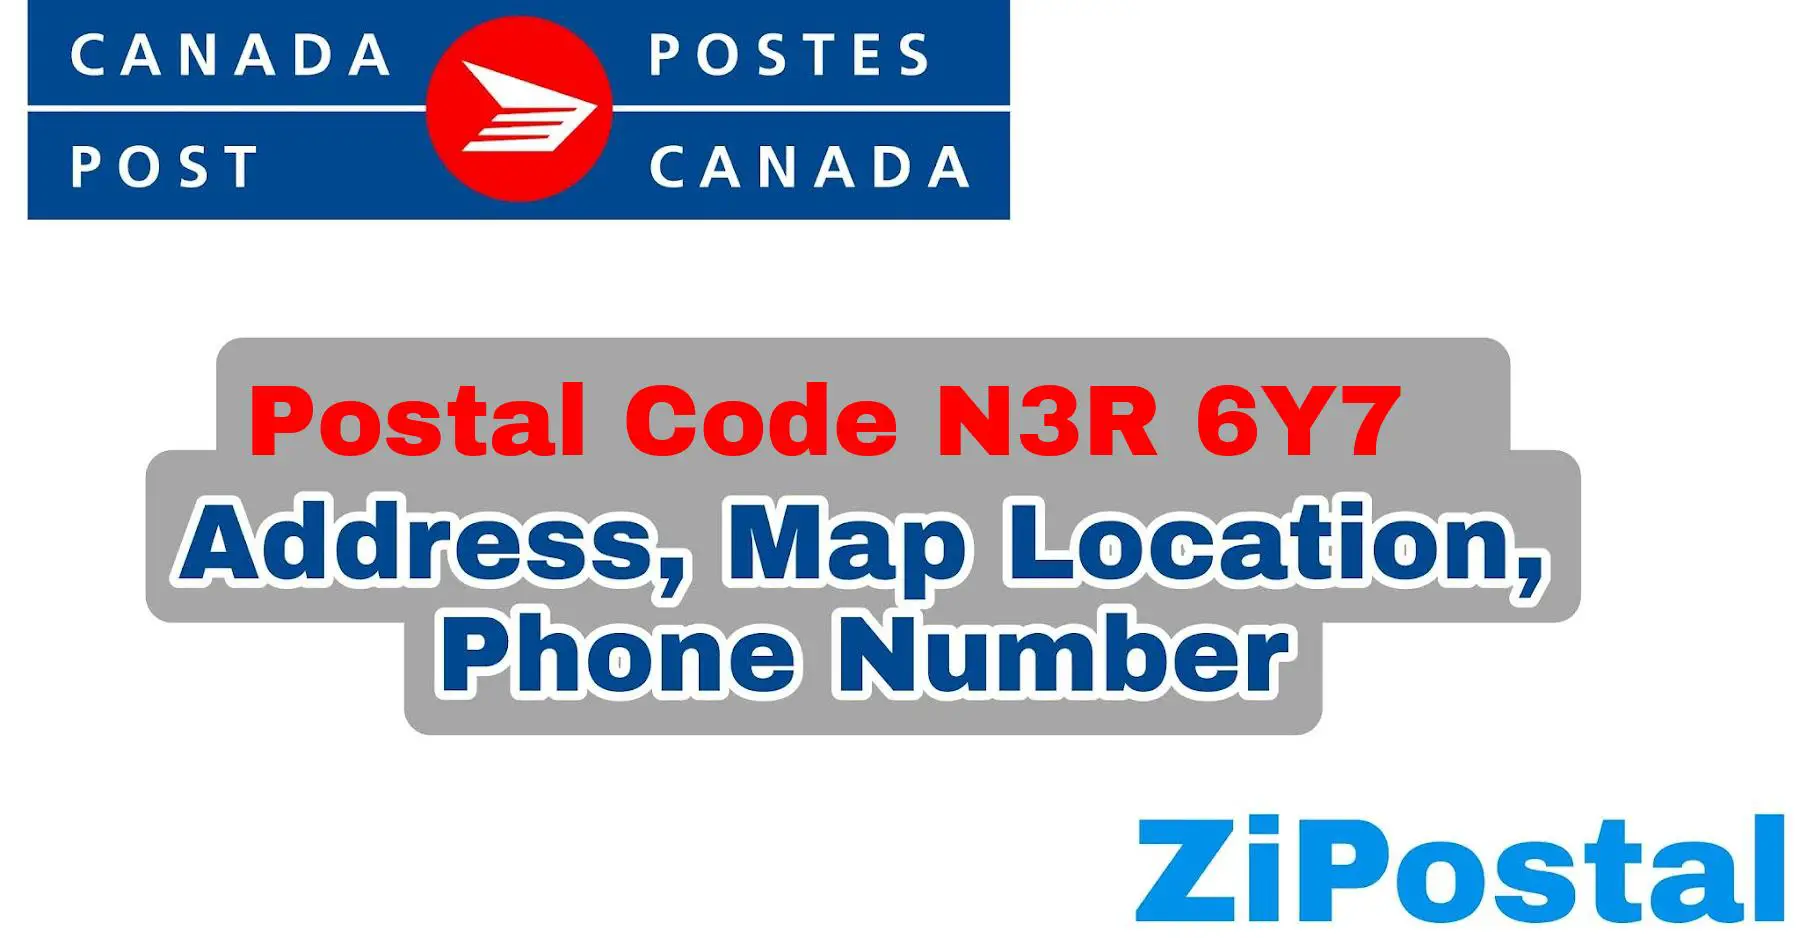 Postal Code N3R 6Y7 Address Map Location and Phone Number